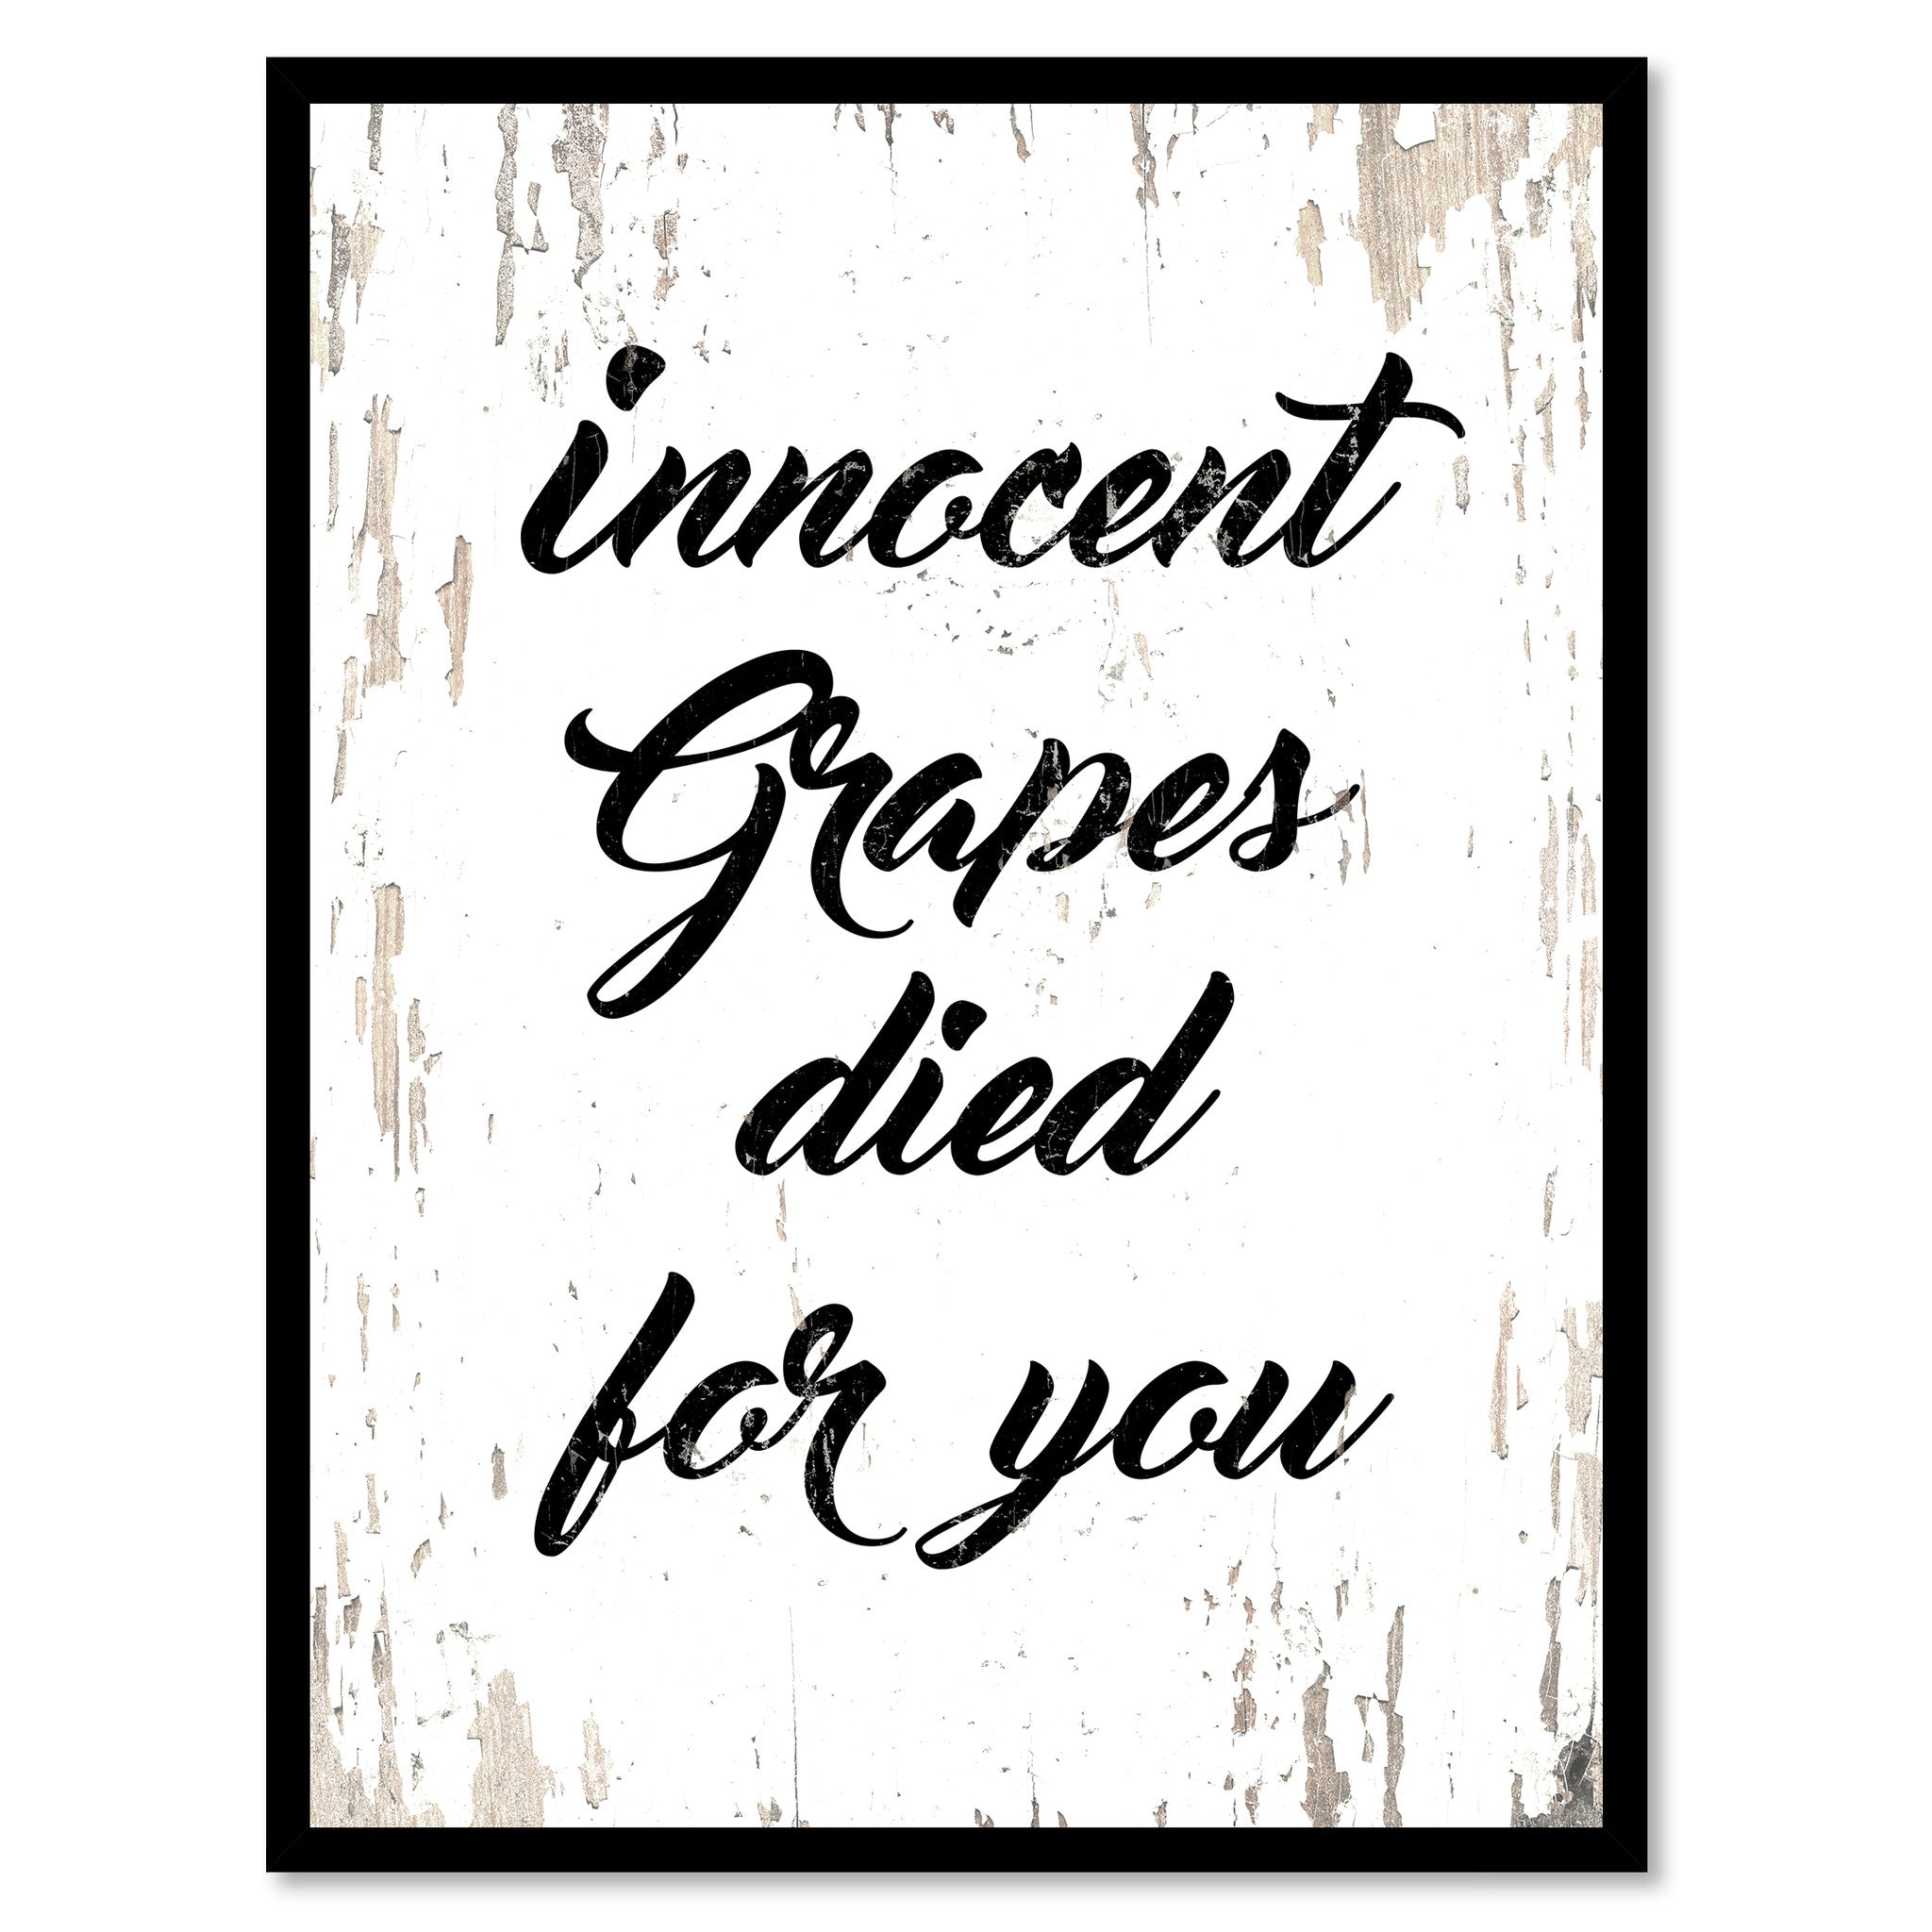 Innocent Grapes Died For You Quote Saying Canvas Print with Picture Frame